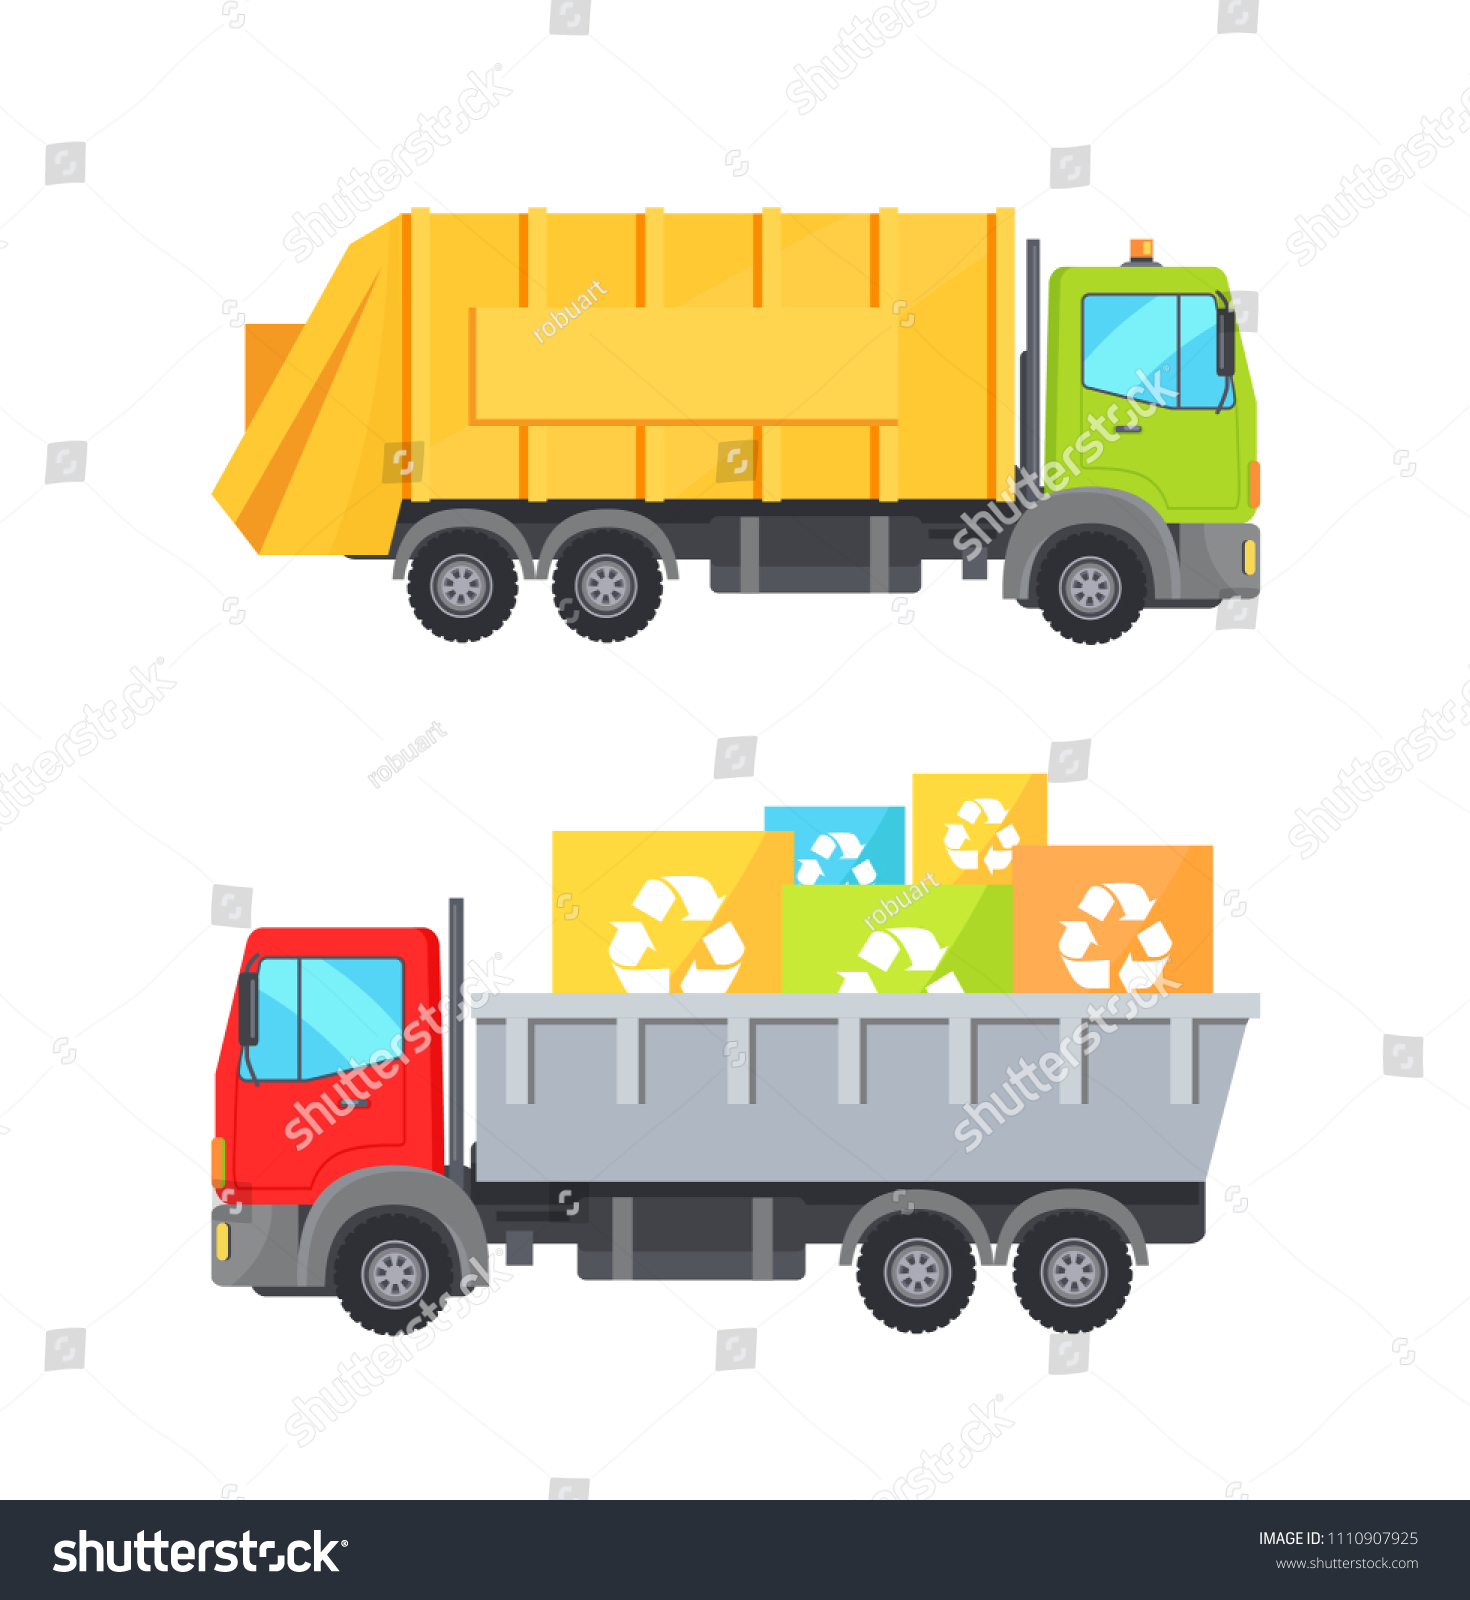 SVG of Trucks transporting waste set of lorries loaded container having recycling sign, transport collection vector illustration isolated on white background svg